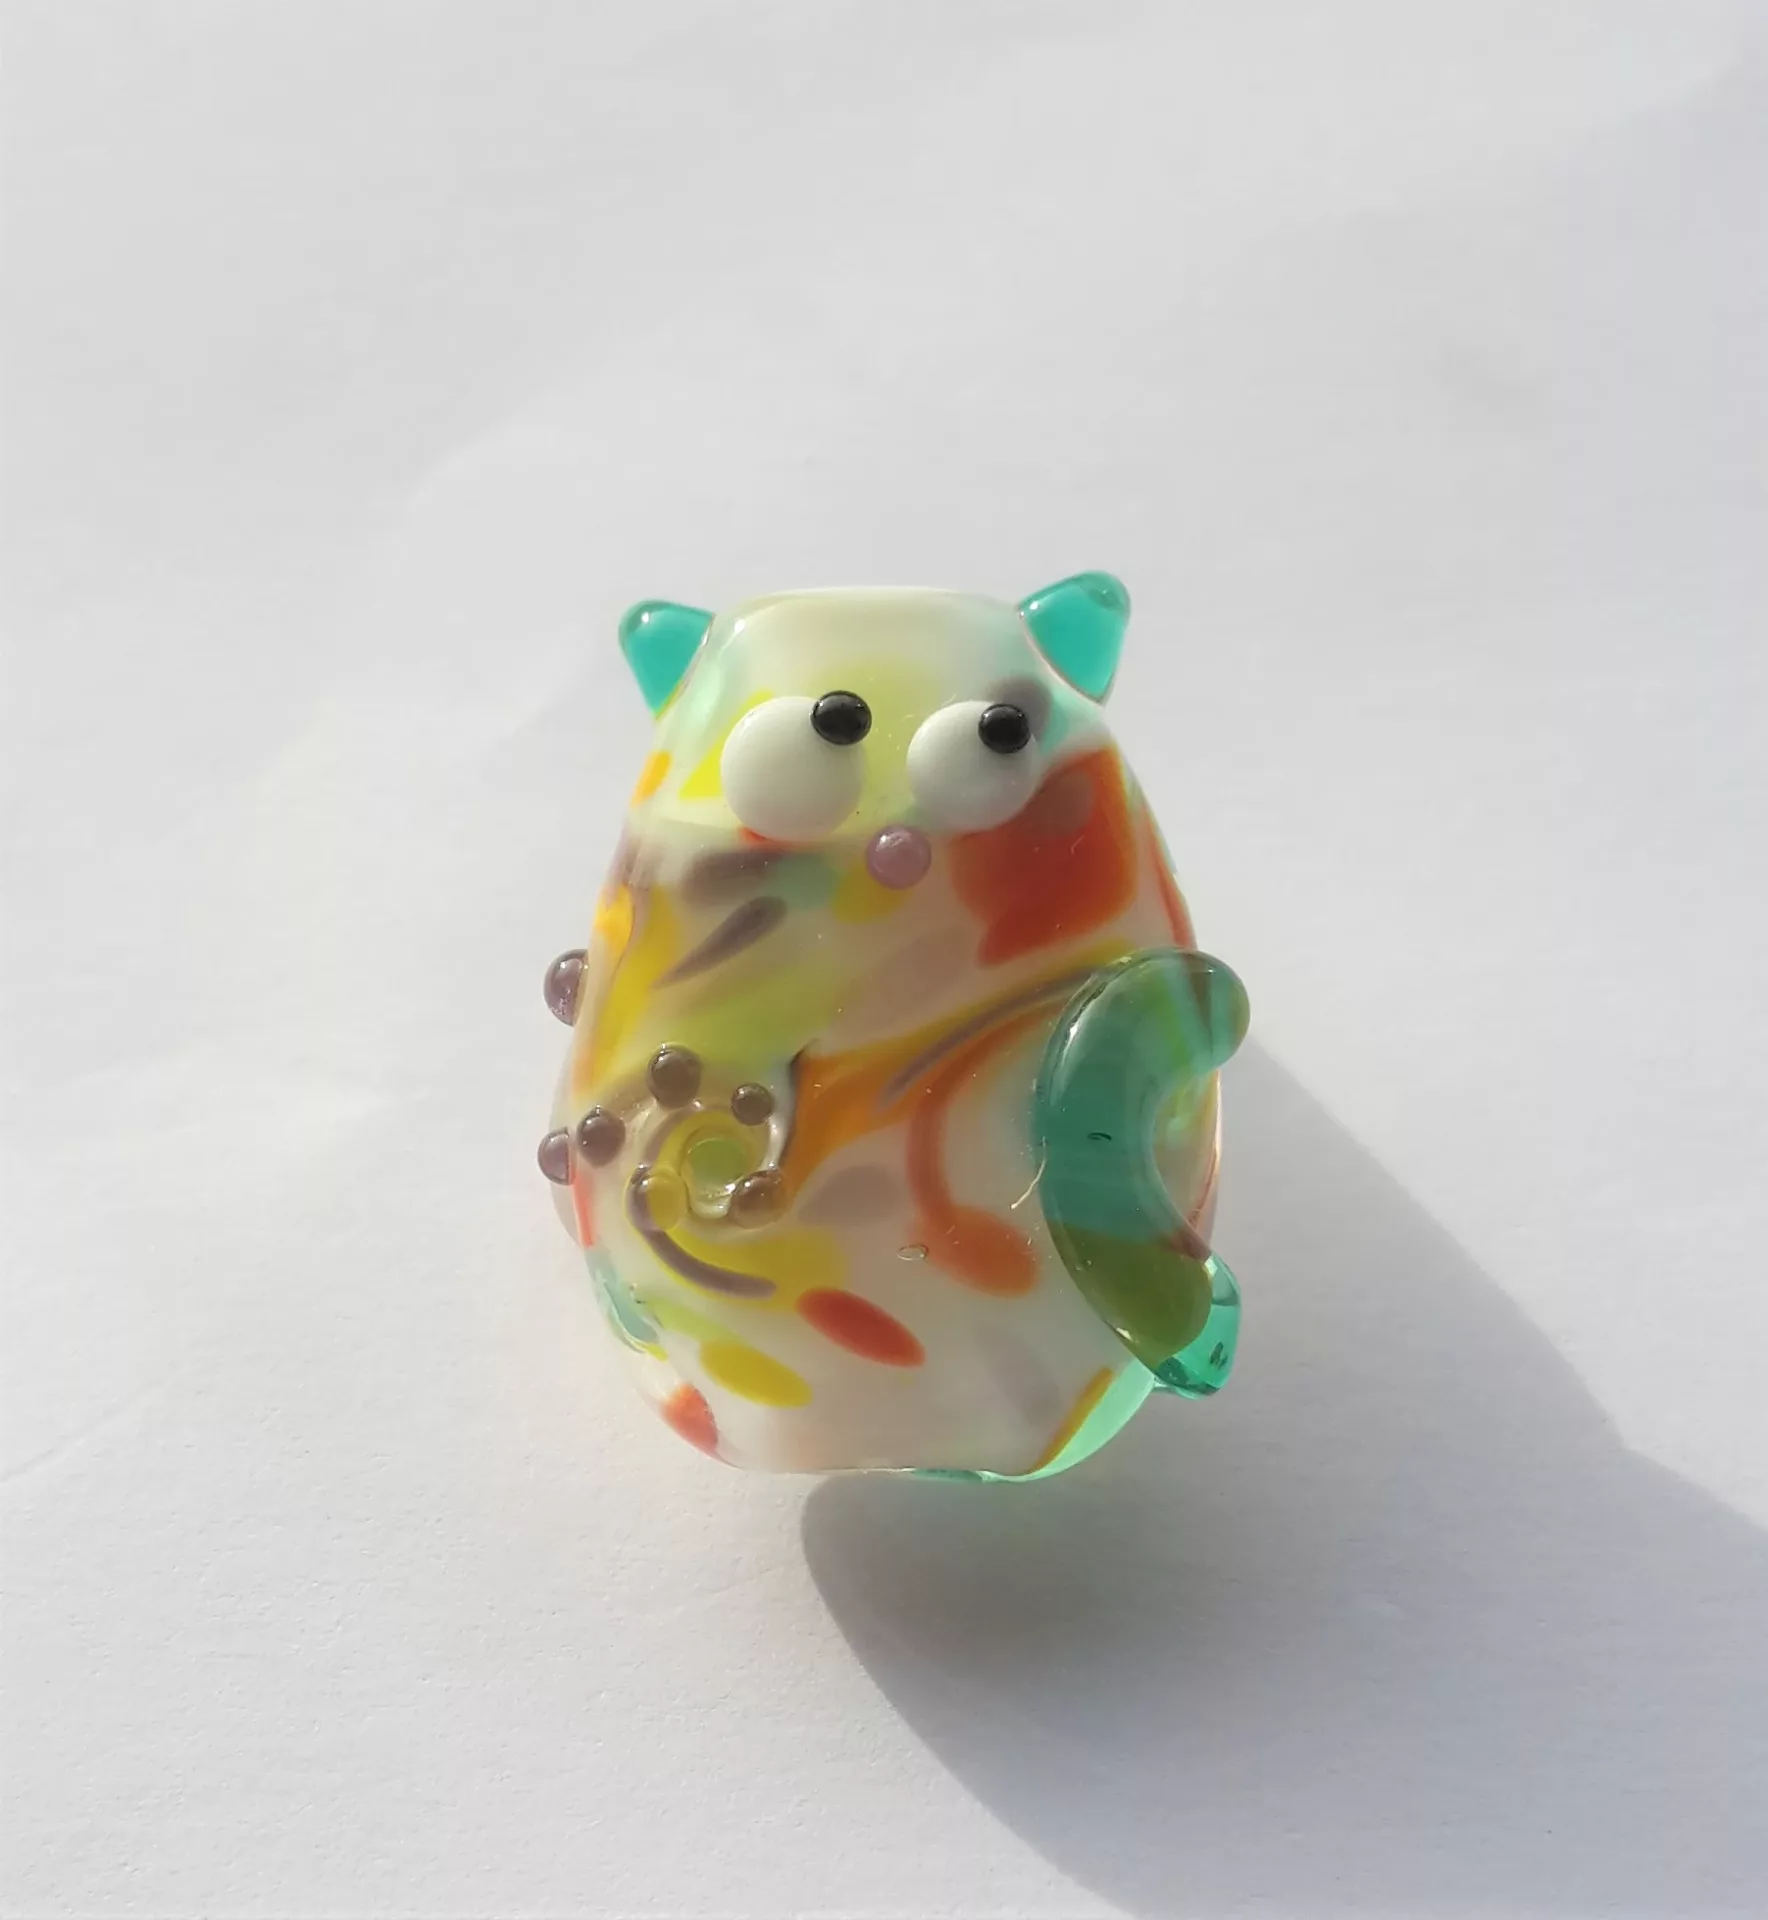 Lampwork glass bead resembling cat with kooky eyes looking sideways. Pearls and dots are being twisted by a swirl into the body of the cat.